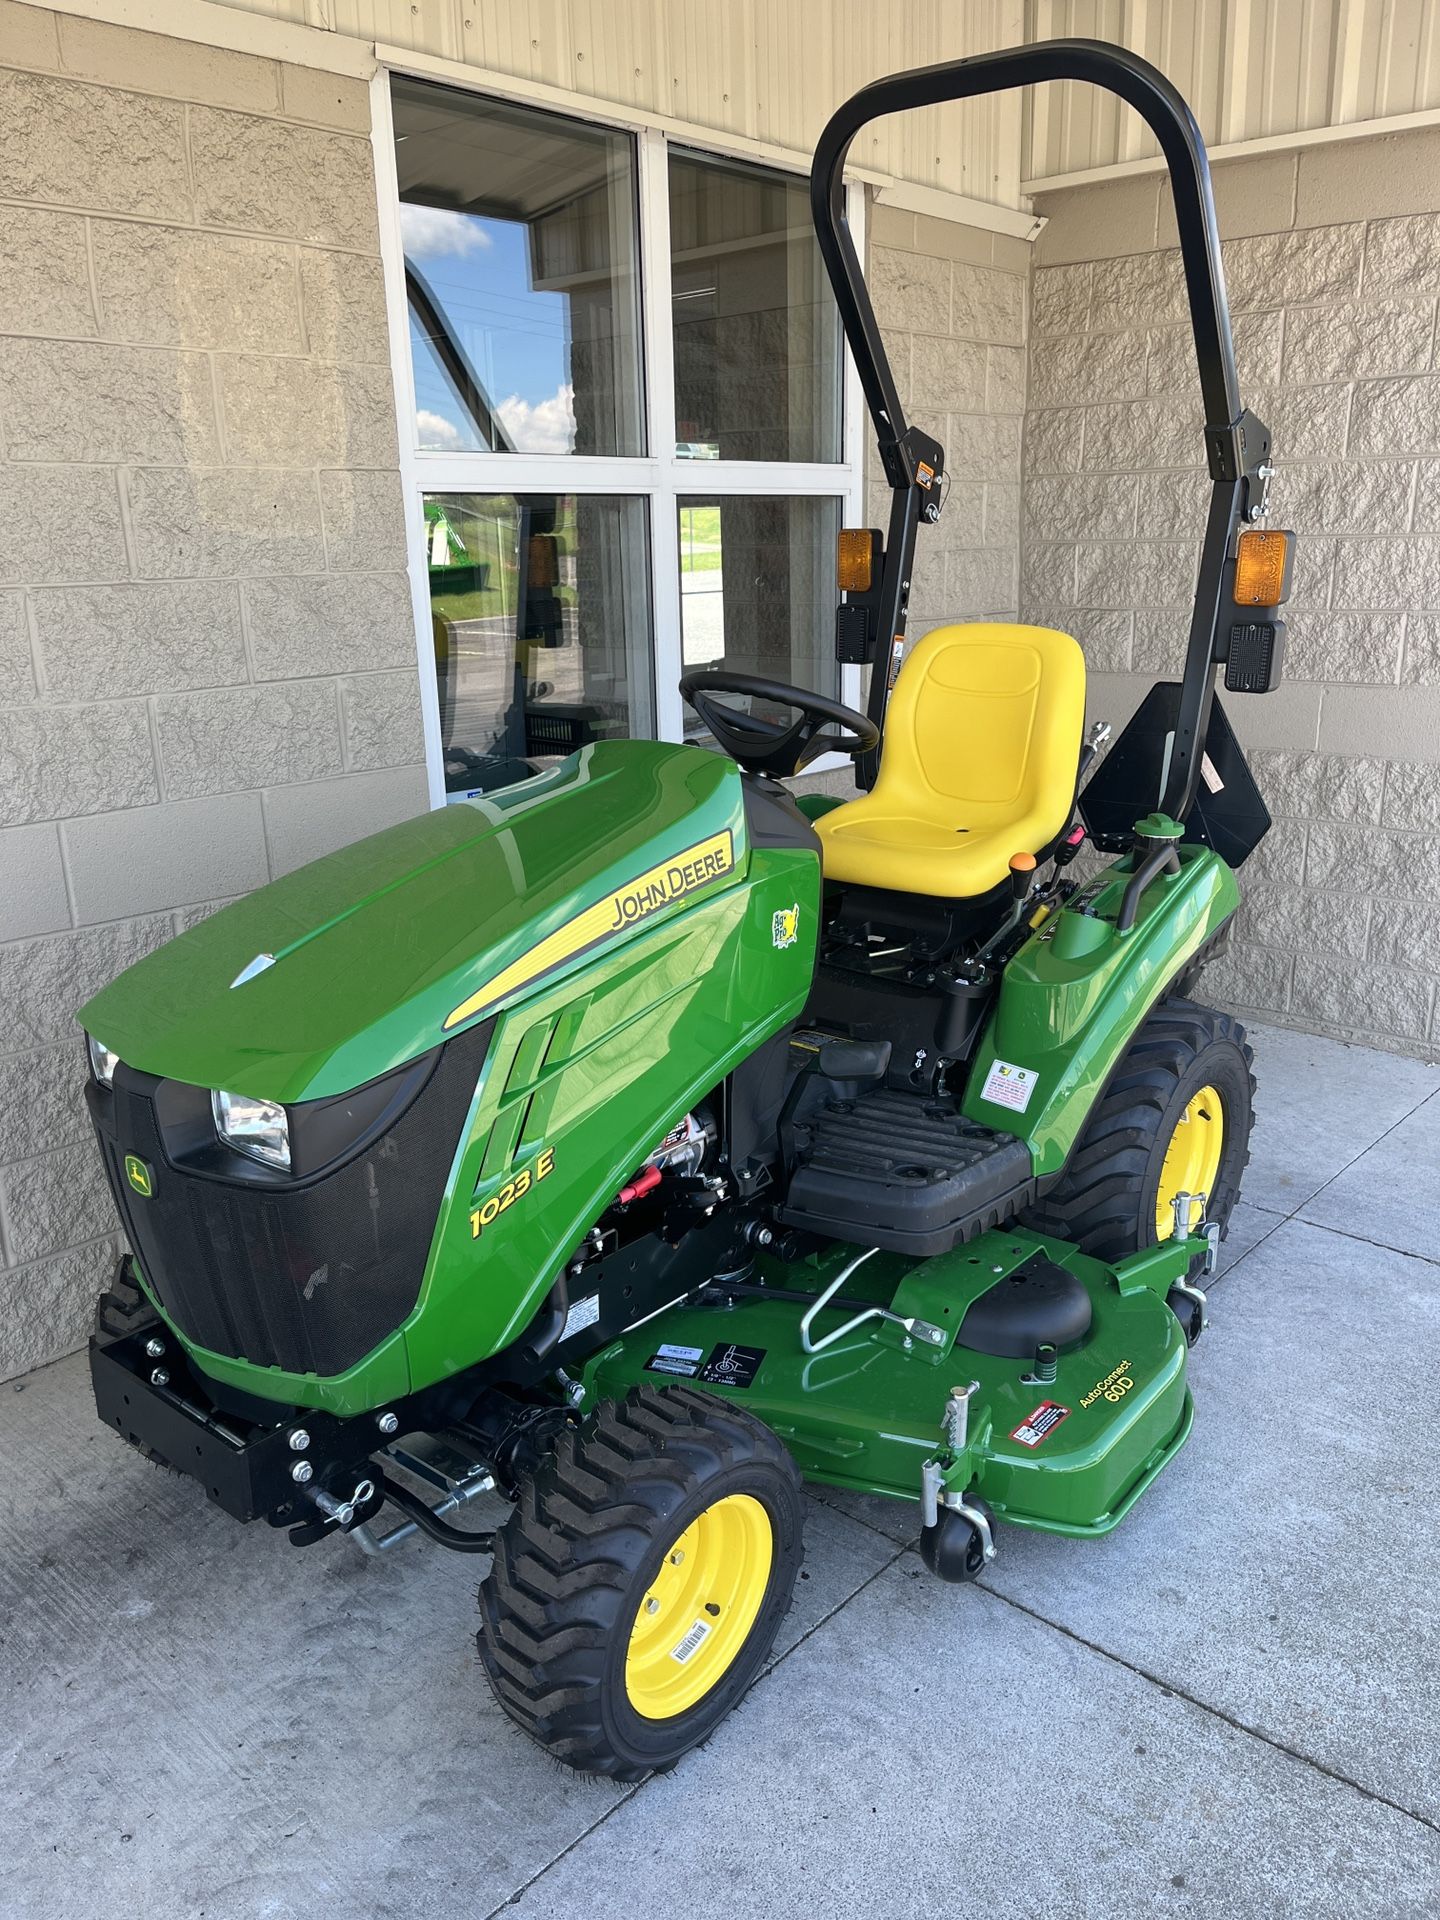 New John Deere 1023E Compact Tractor With 60” Belly Mower